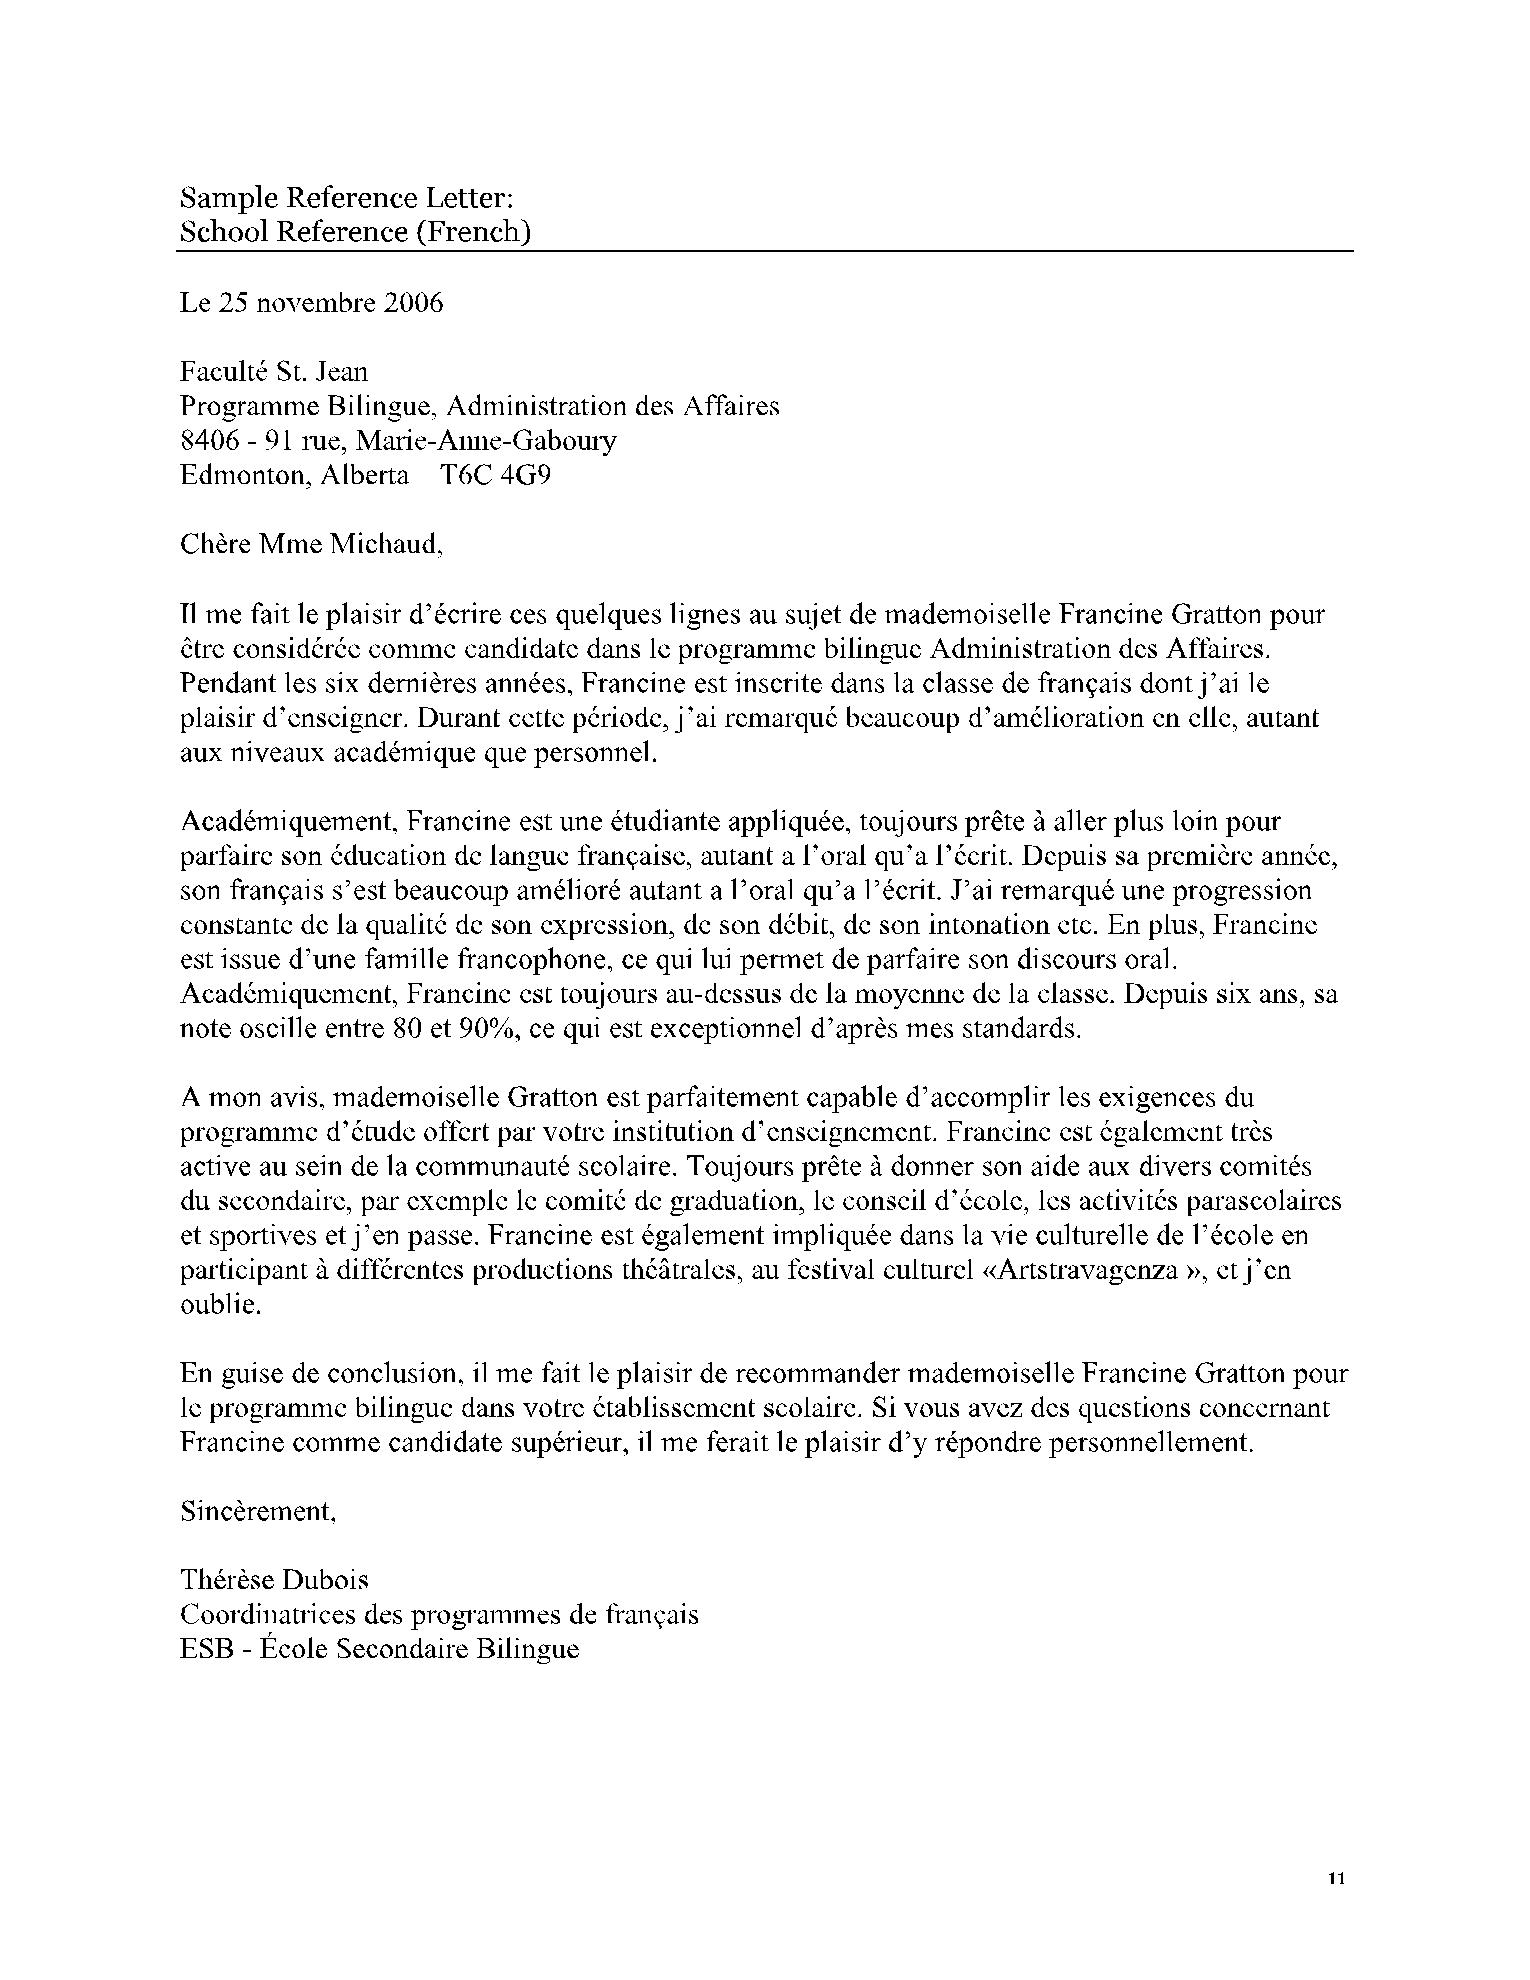 Letter of Recommendation for Immigration 11